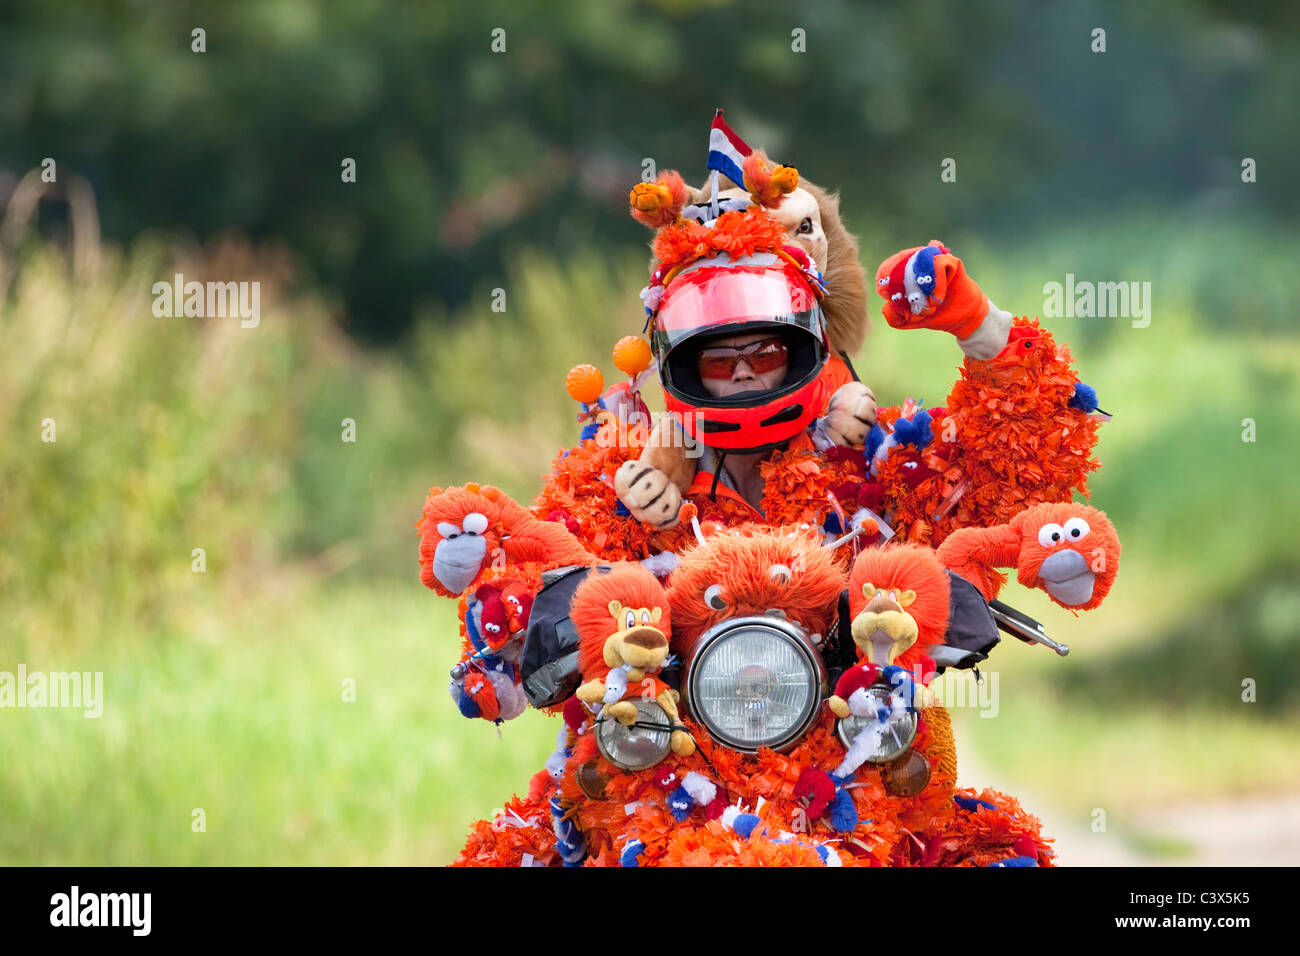 The Netherlands, World Cup Football July 2010. Motorcyclist decorated in orange, Oranje Jopie, supporter Dutch national team. Stock Photo